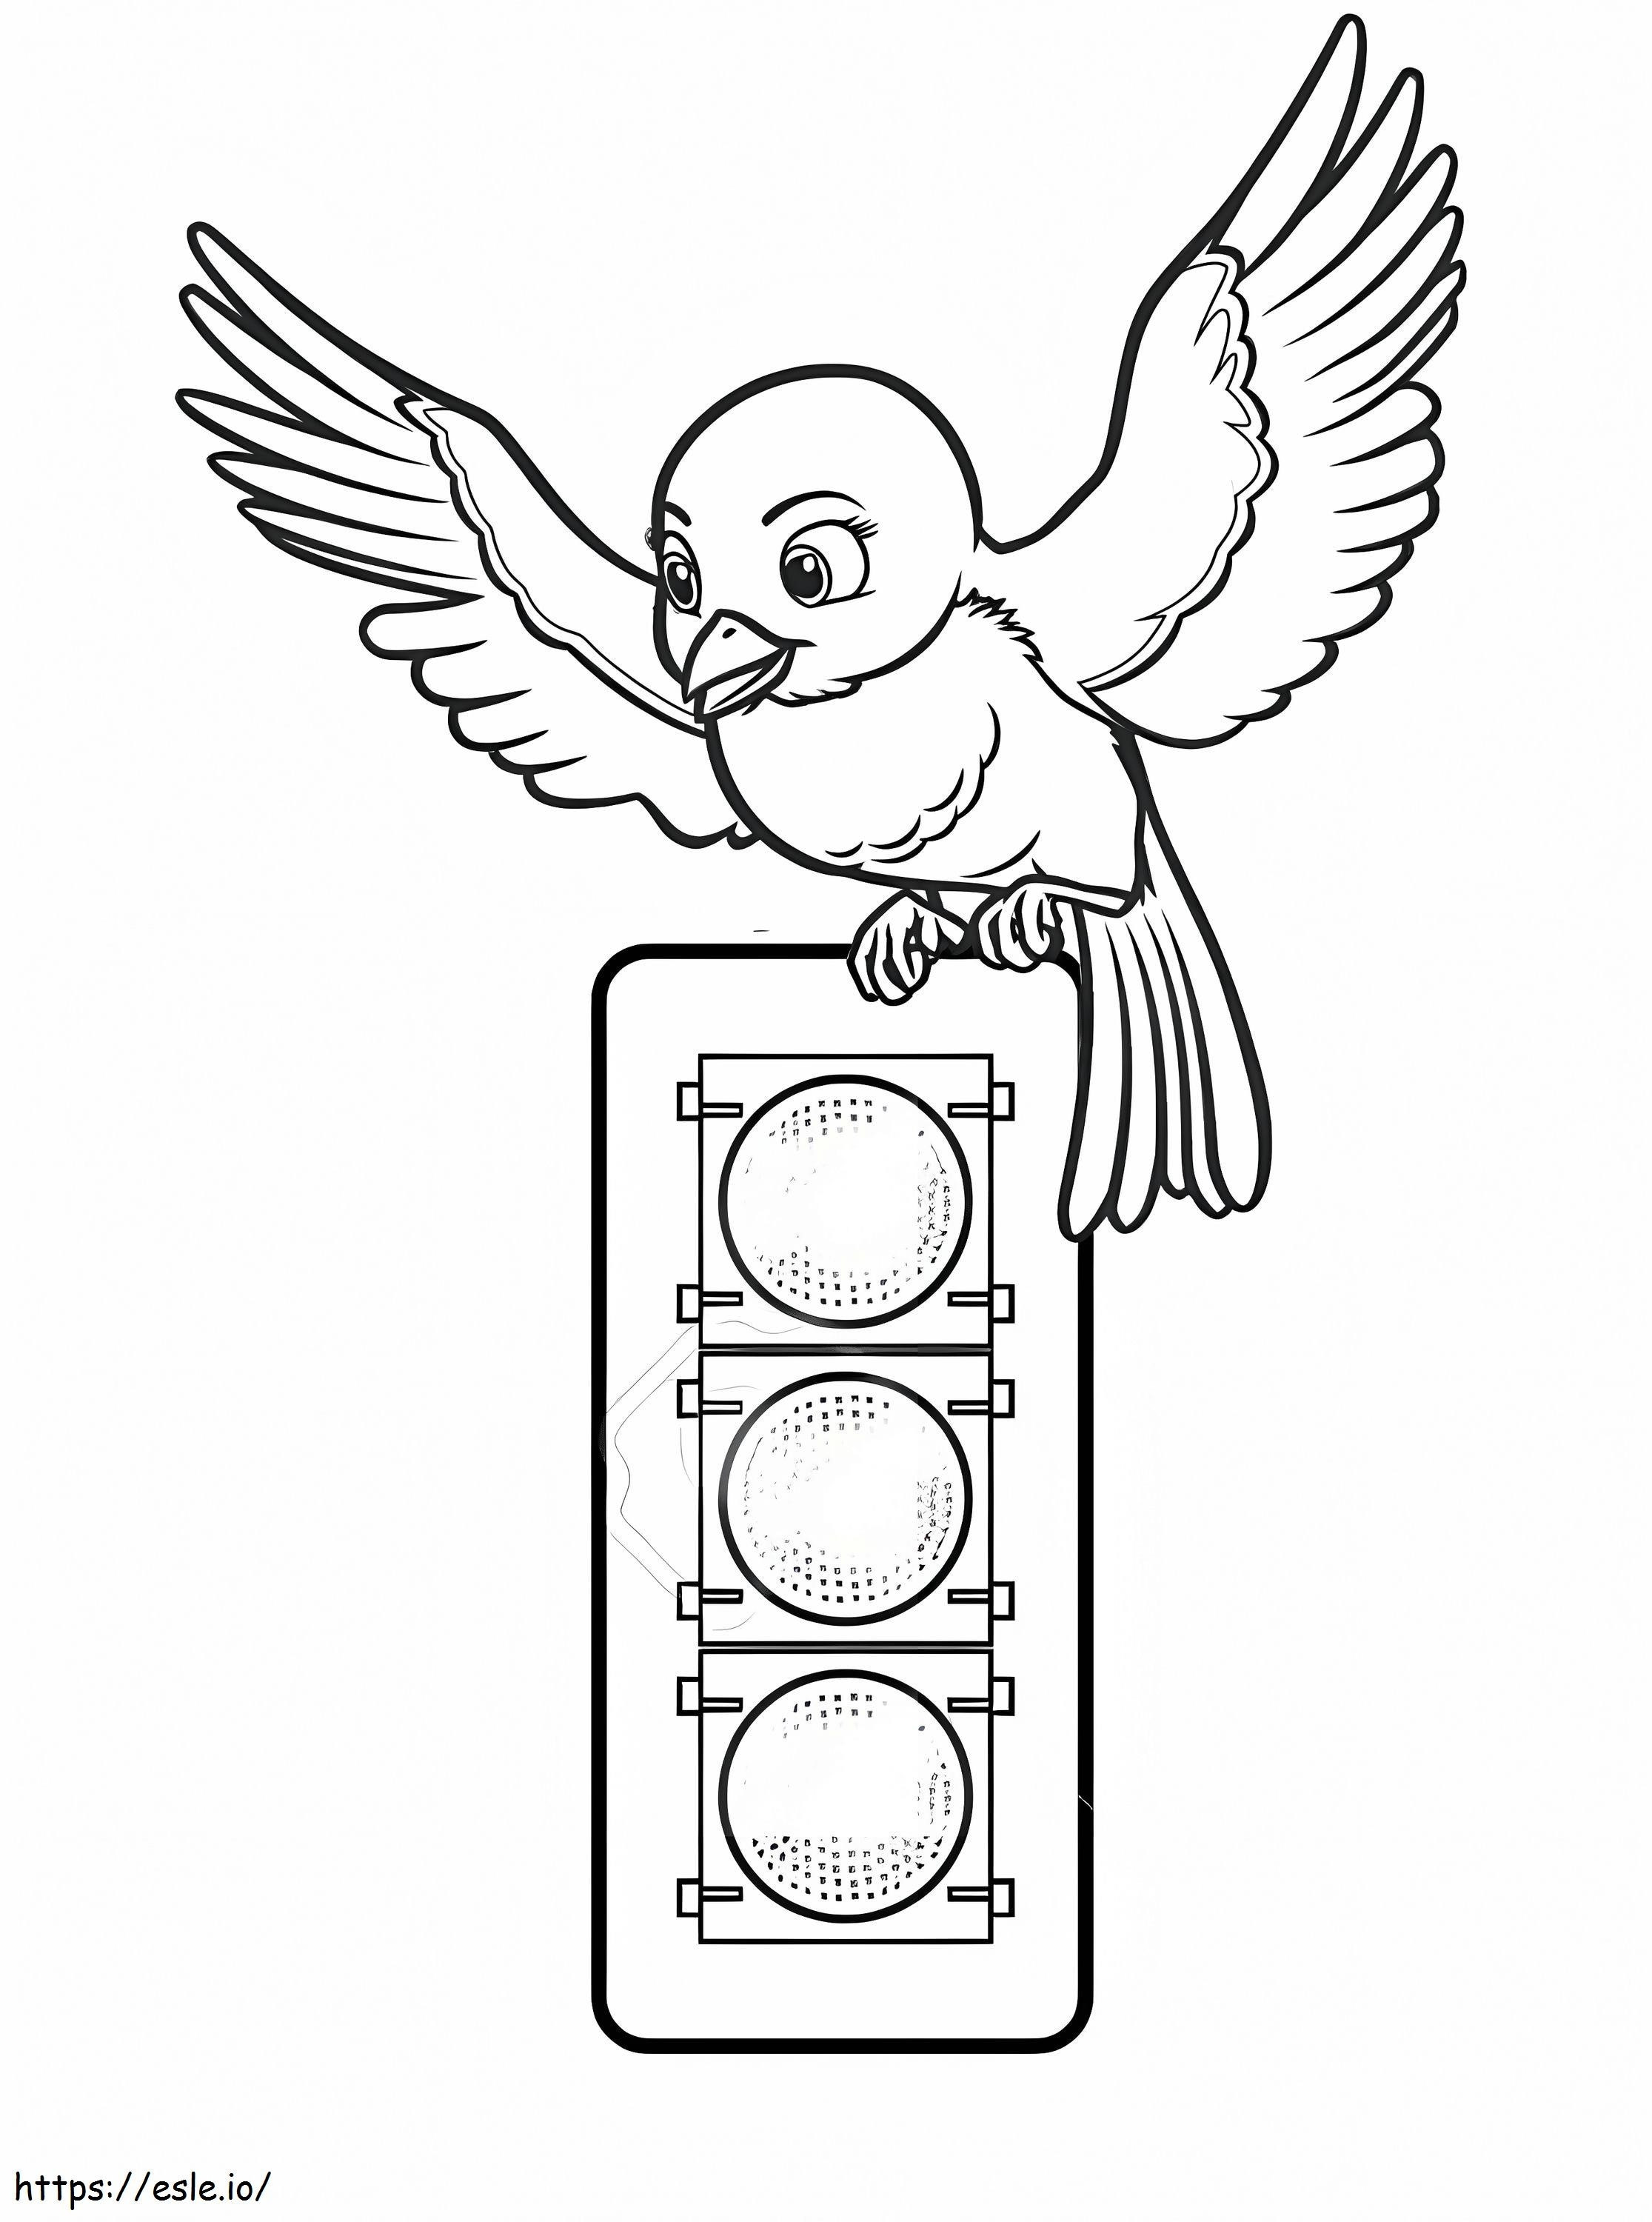 Bird At Traffic Light coloring page